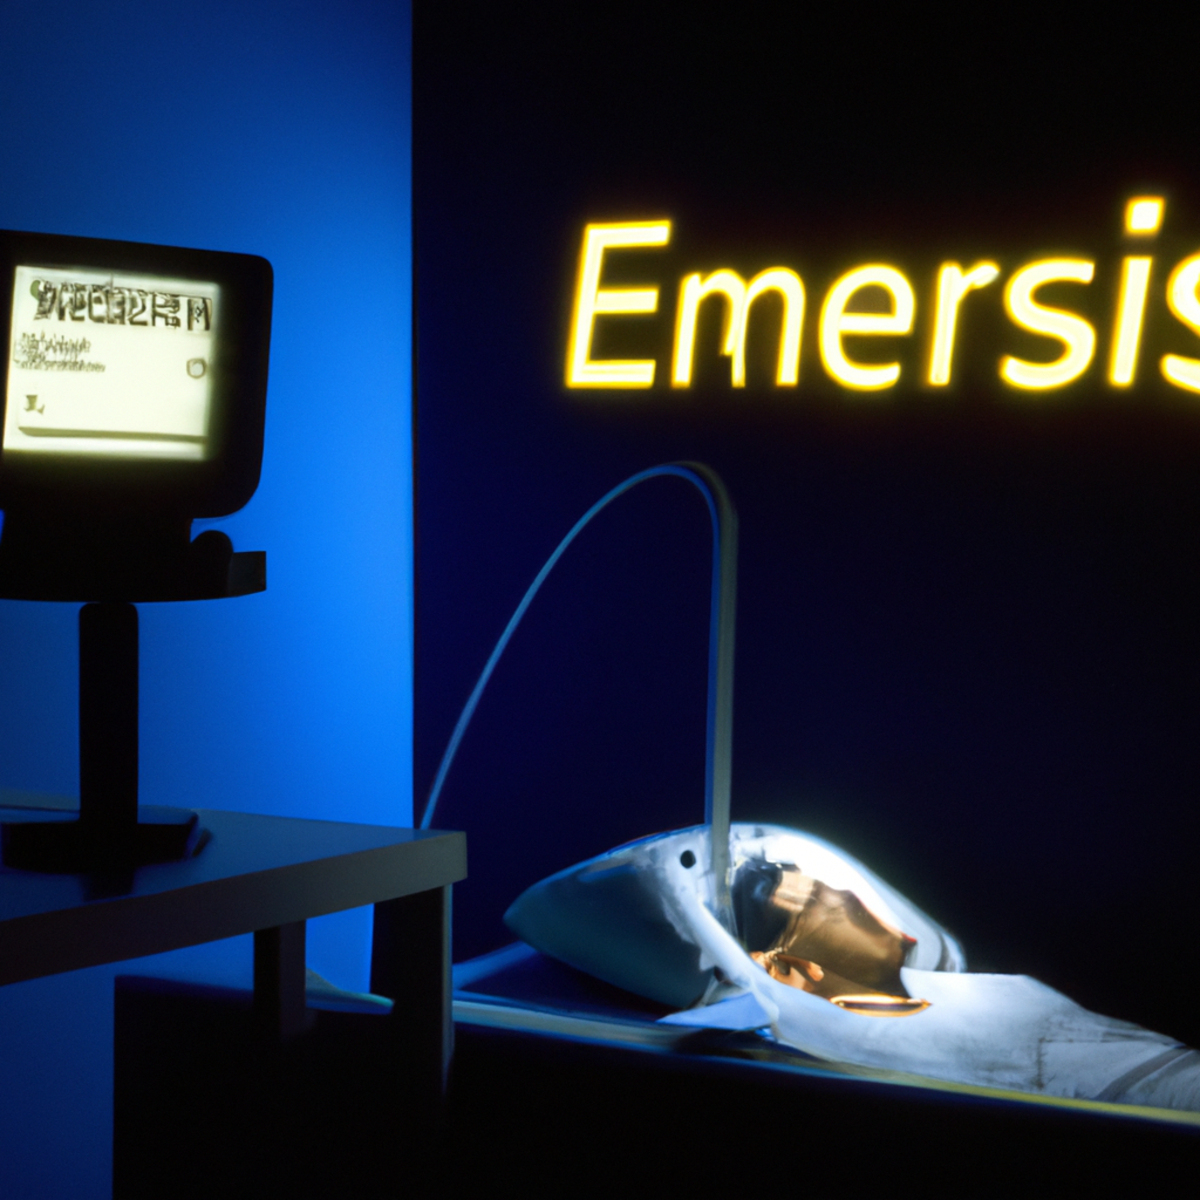 Medical setting with diagnostic equipment and tools, highlighting precision and complexity in diagnosing Rasmussen's Encephalitis in adults.